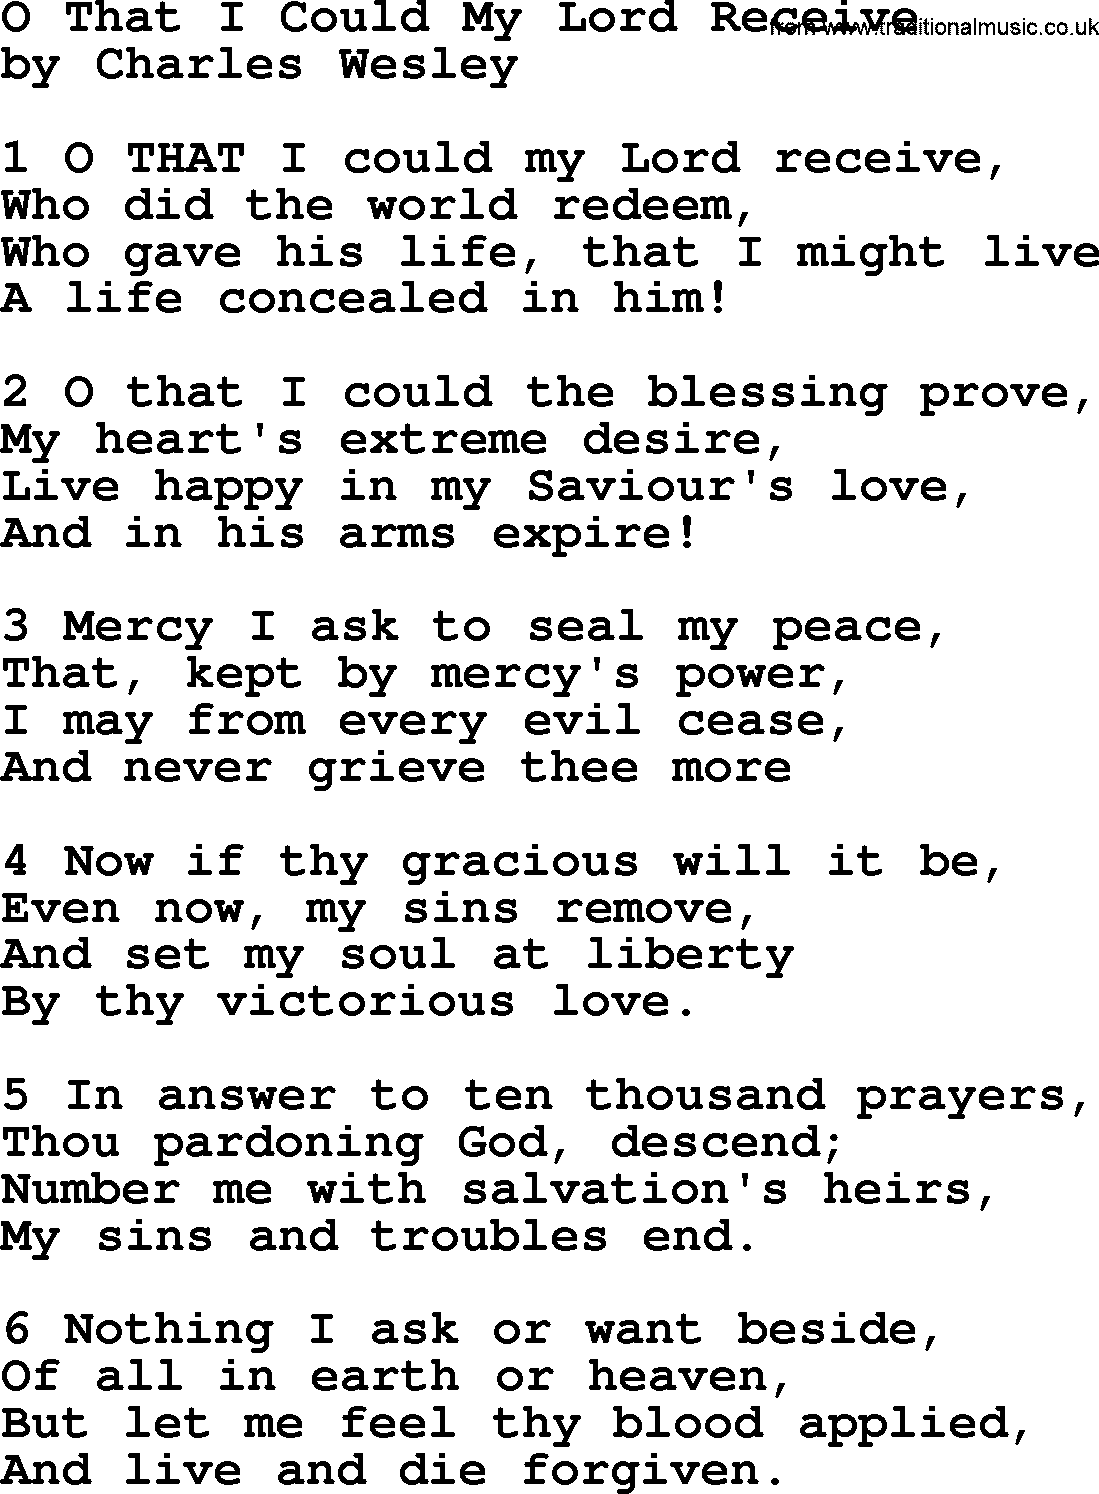 Charles Wesley hymn: O That I Could My Lord Receive, lyrics